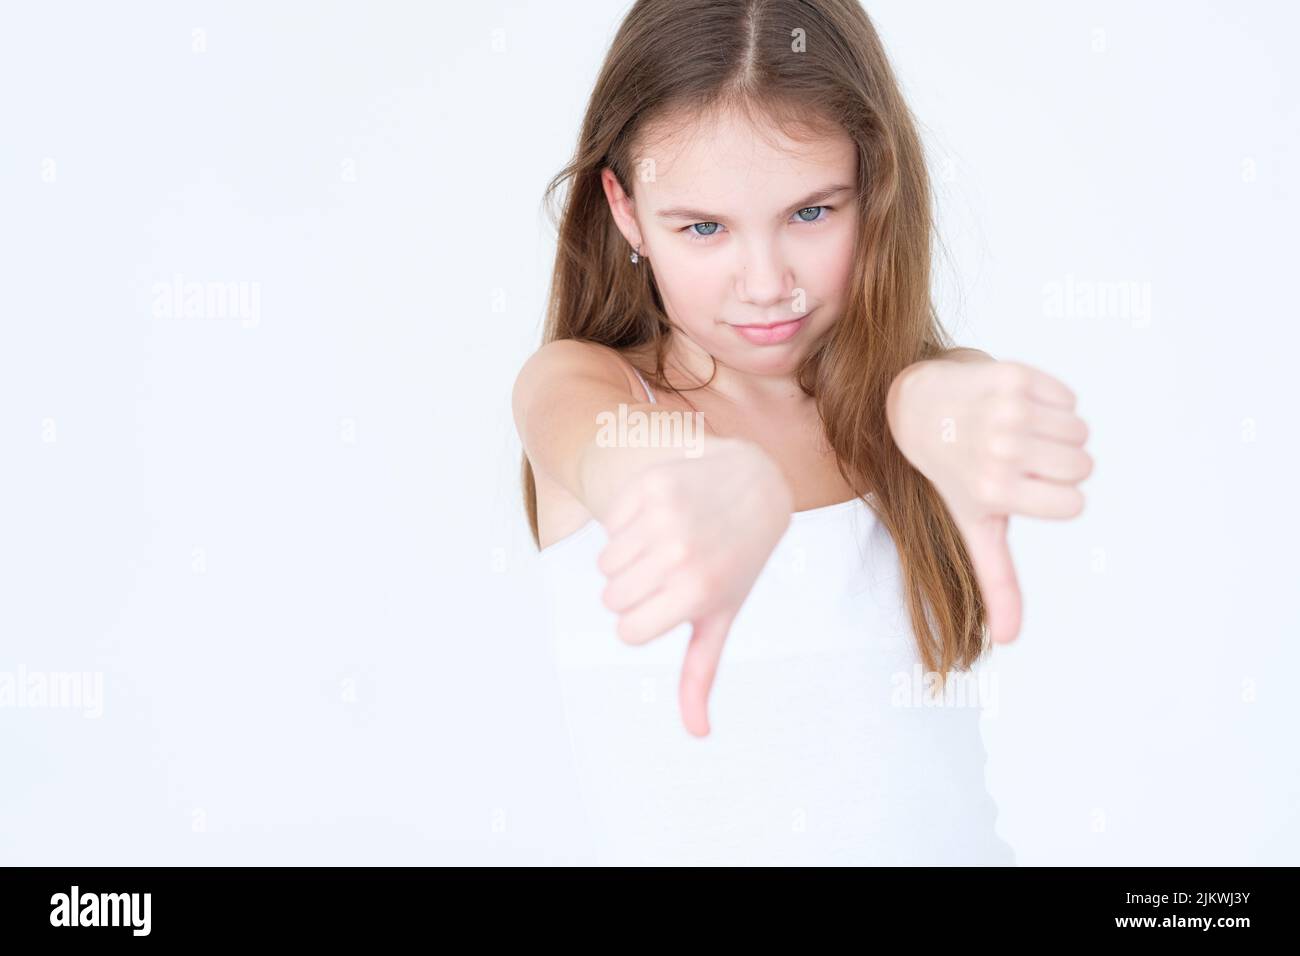 emotion disapproving displeased child thumb down Stock Photo